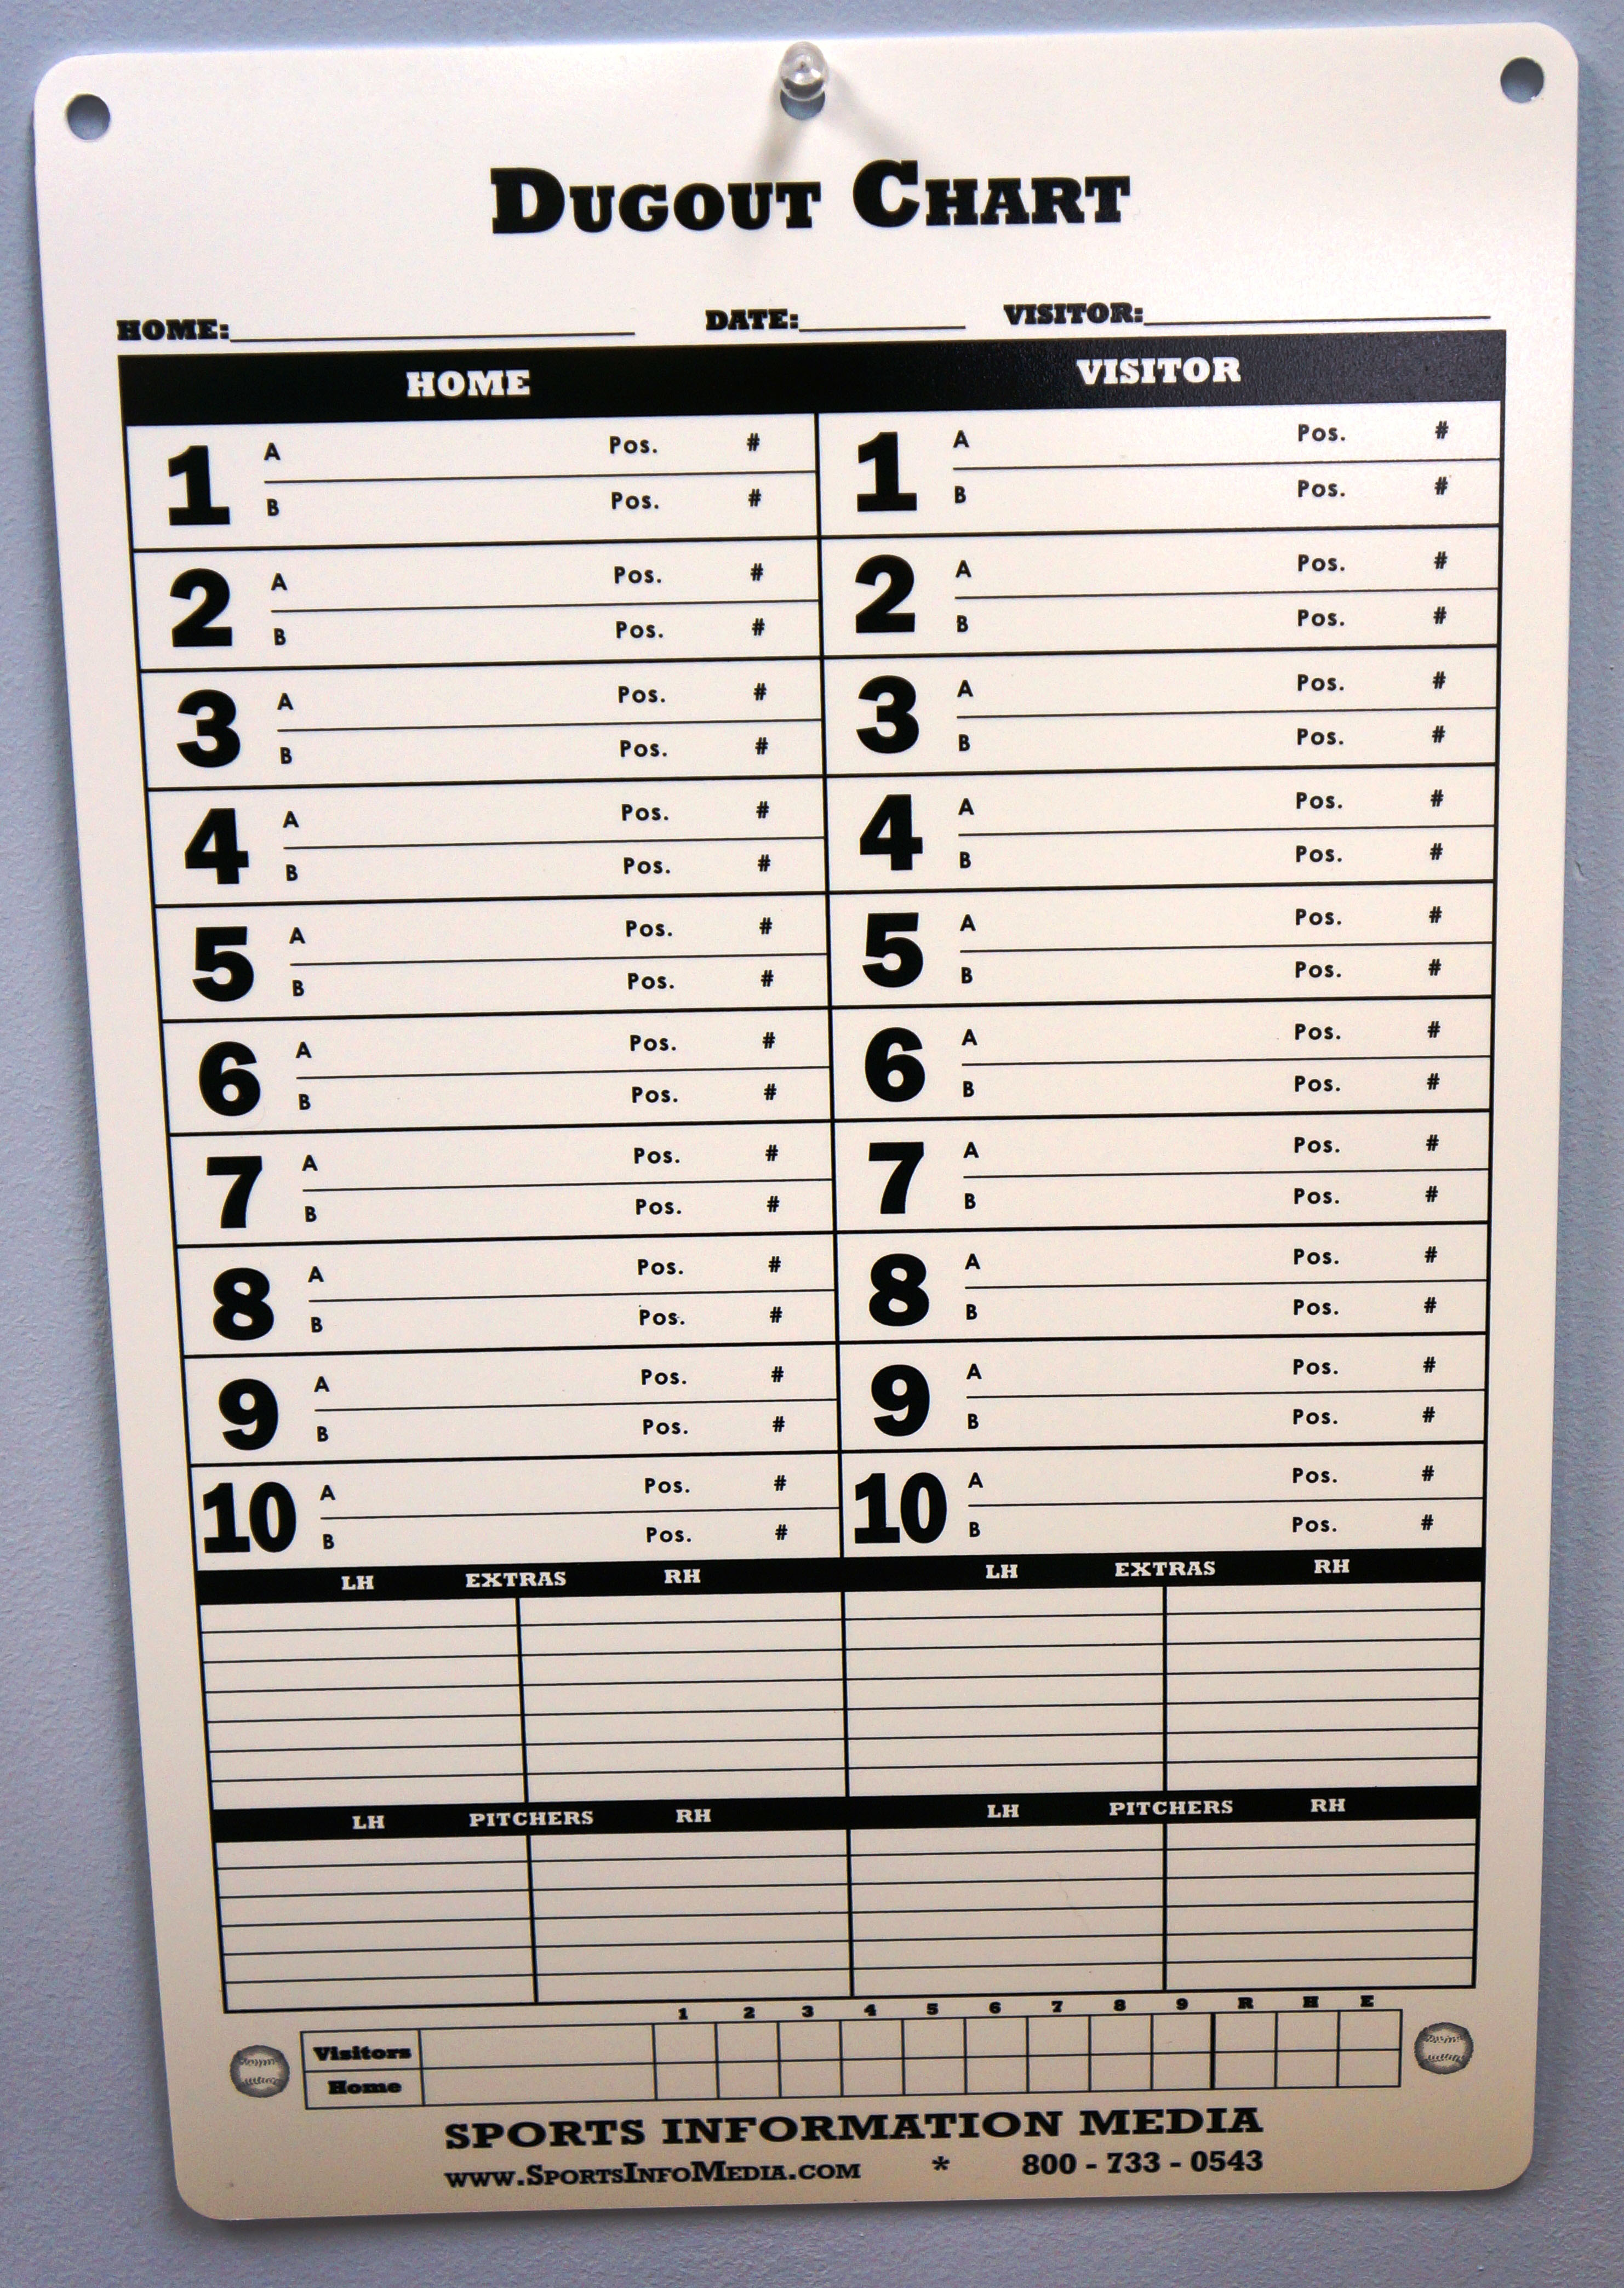 Sports Information is proud to introduce the Reusable Dugout Chart